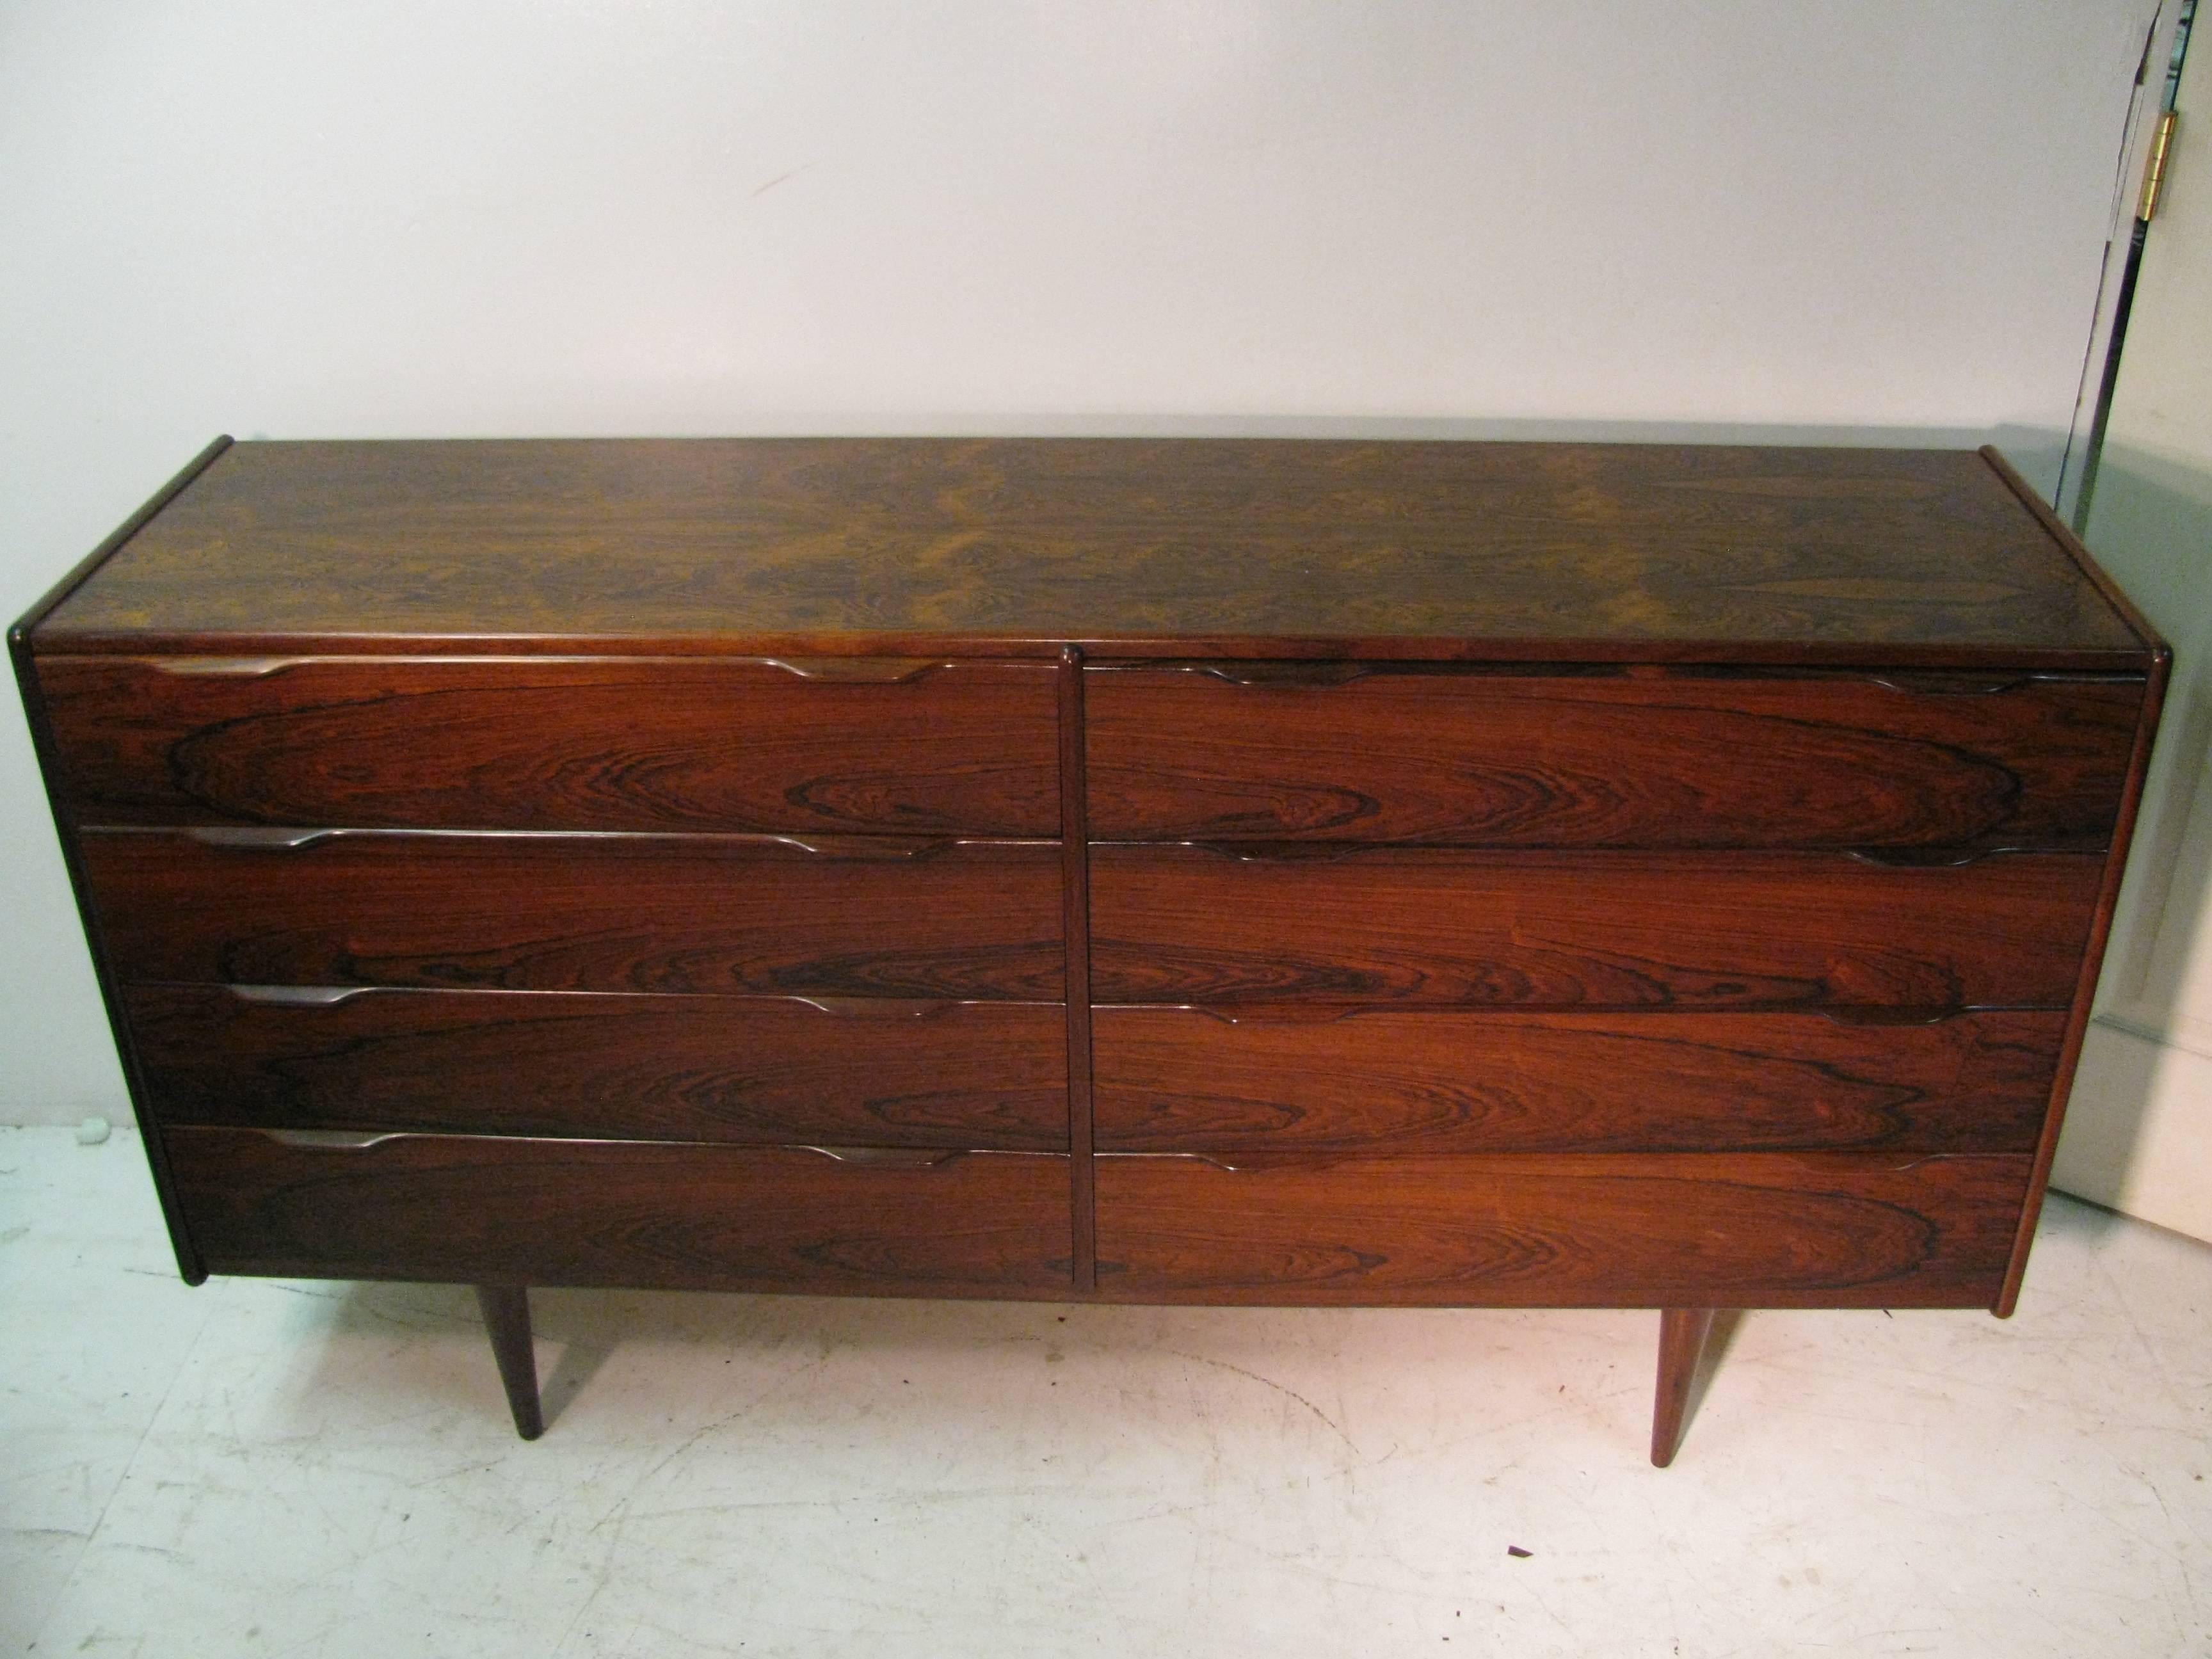 Simple and elegant rosewood long eight-drawer dresser. Bookmatched rosewood with solid rosewood pulls. Plenty of storage. Excellent condition with minor wear.